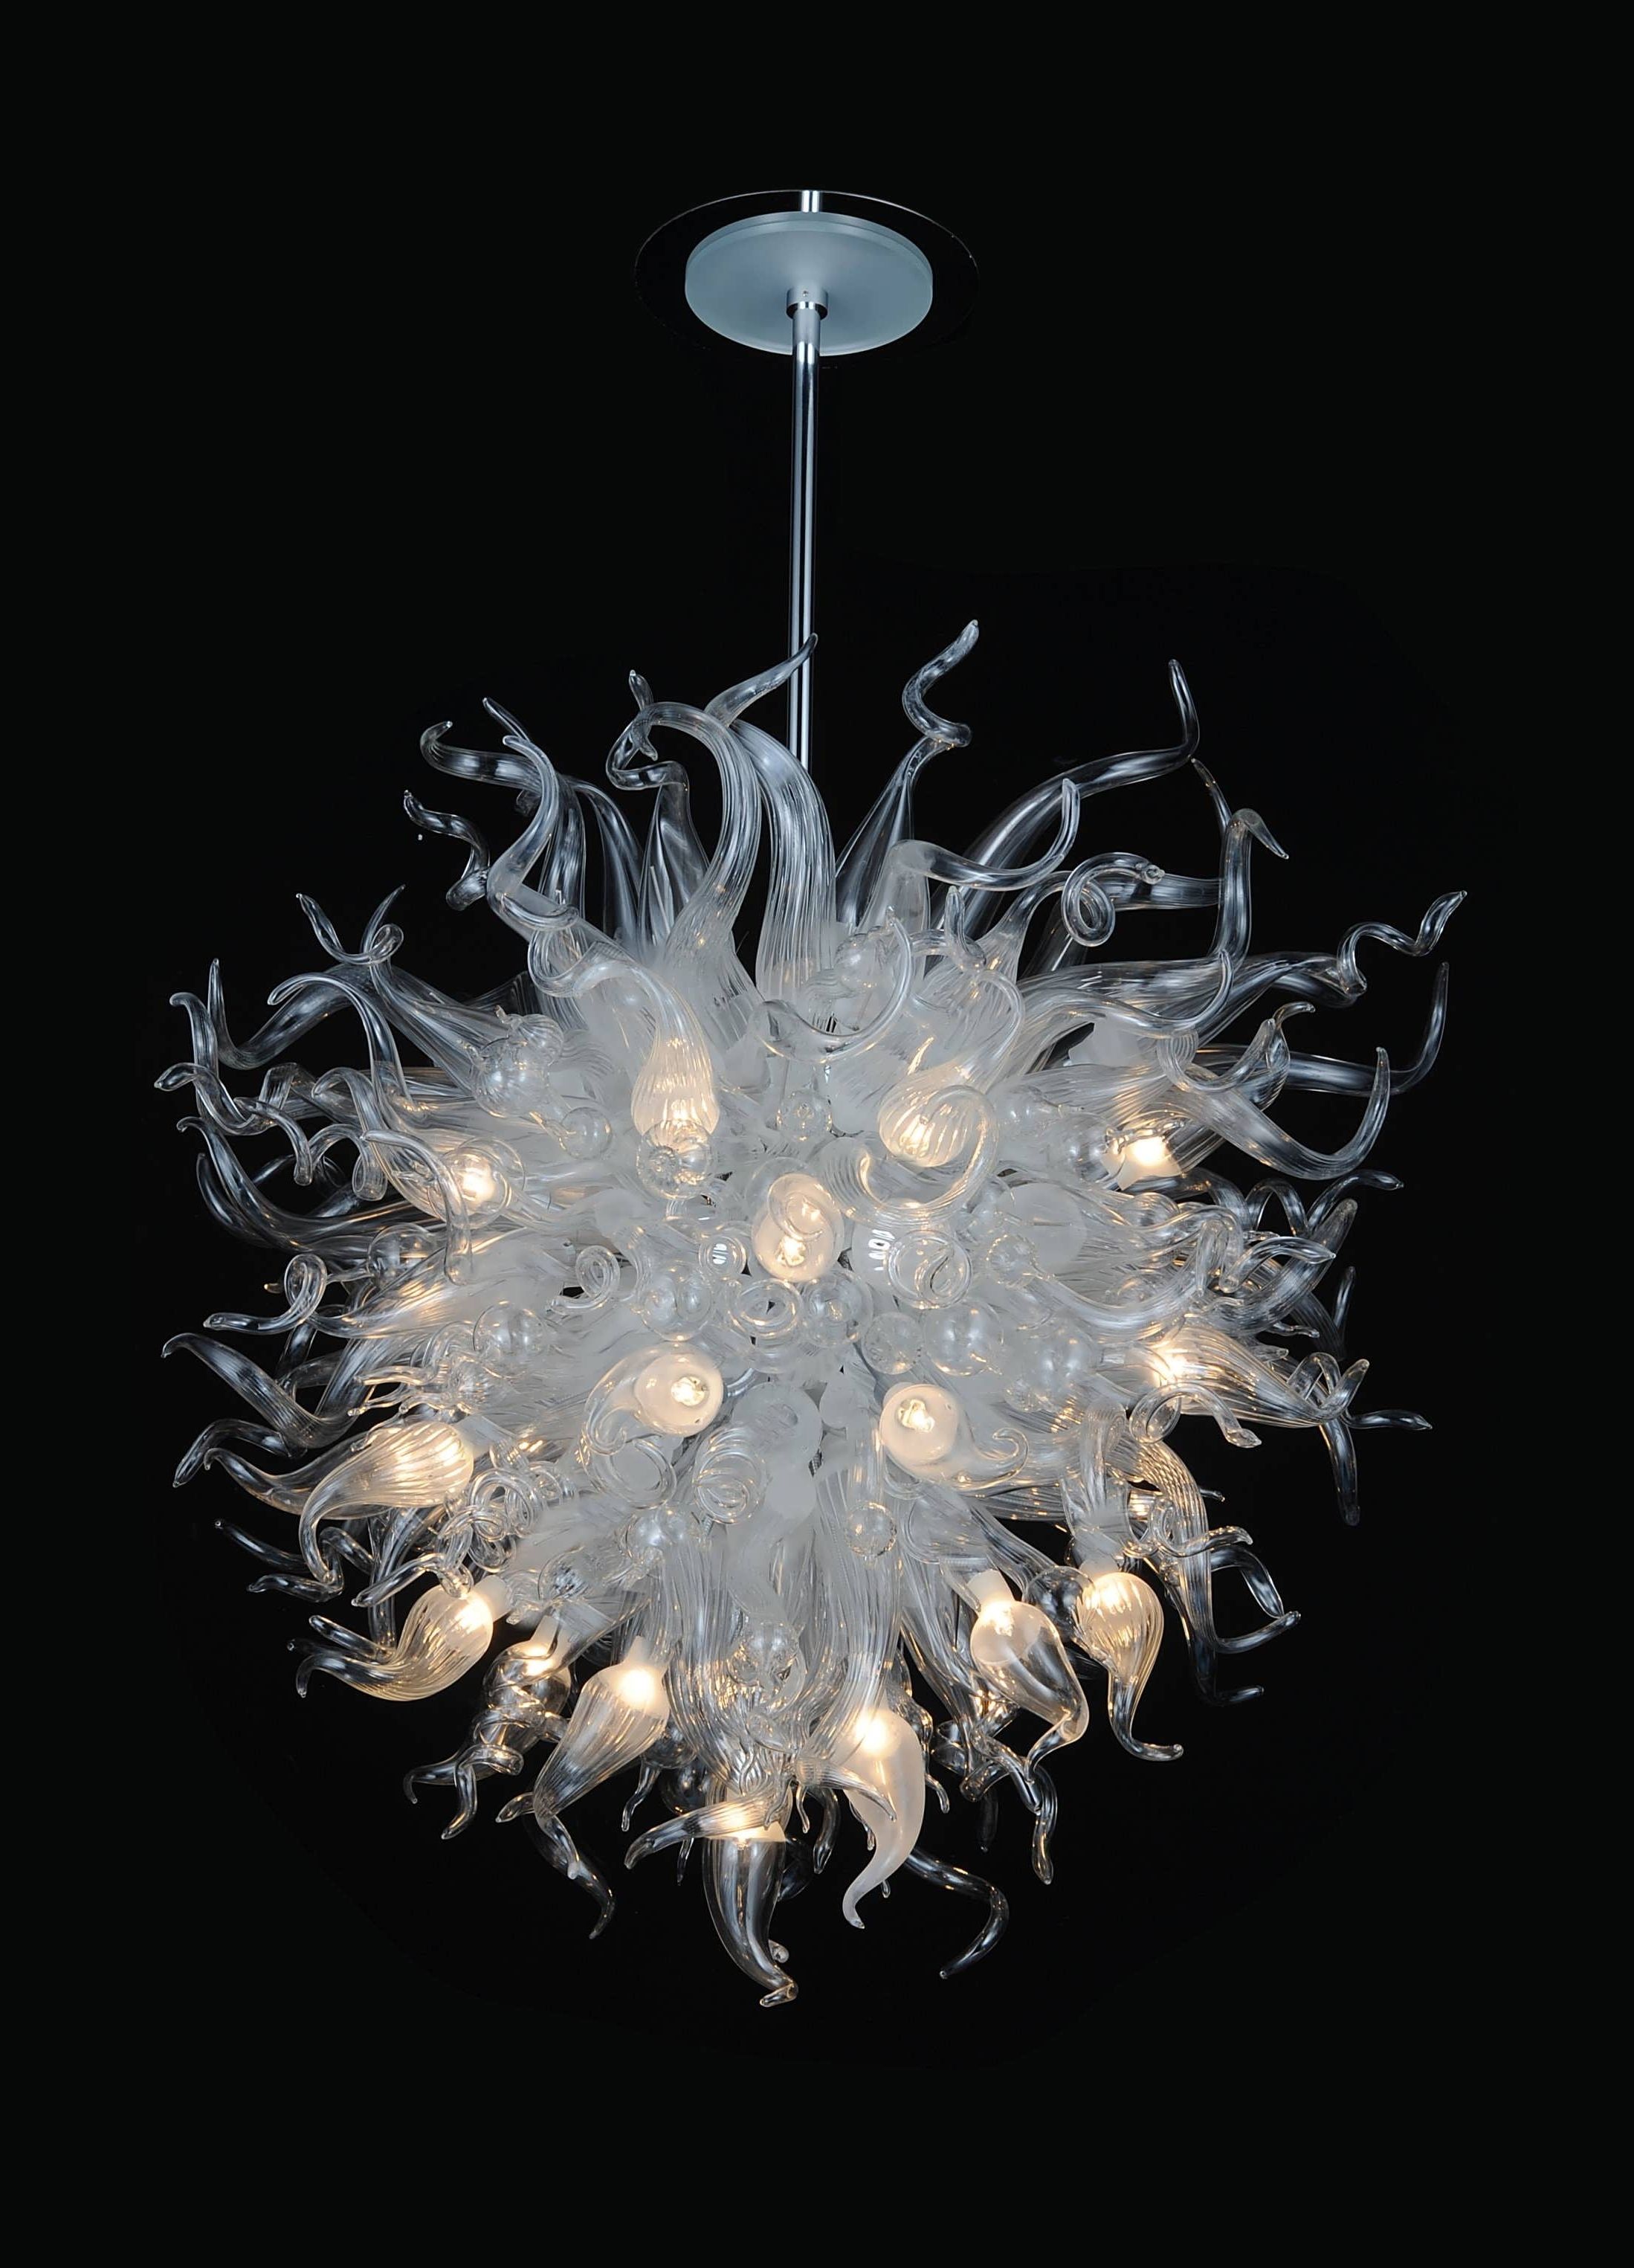 Favorite Small Glass Chandeliers Throughout Amazing Blown Glass Chandeliers With Chandelier Pottery Barn Designs (View 16 of 20)